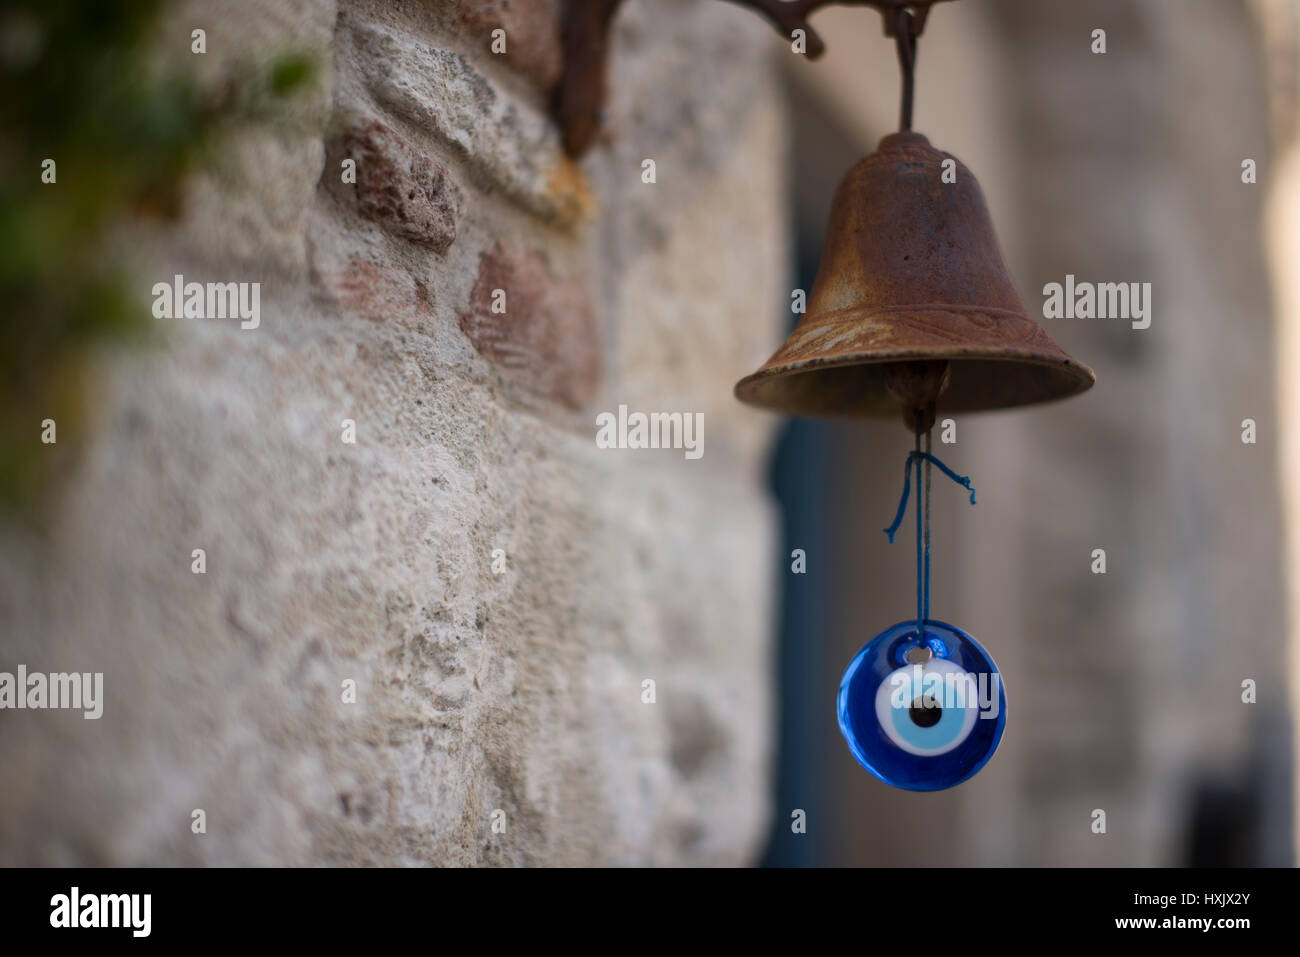 Rusted metal bell and amulet doorbell. Stock Photo